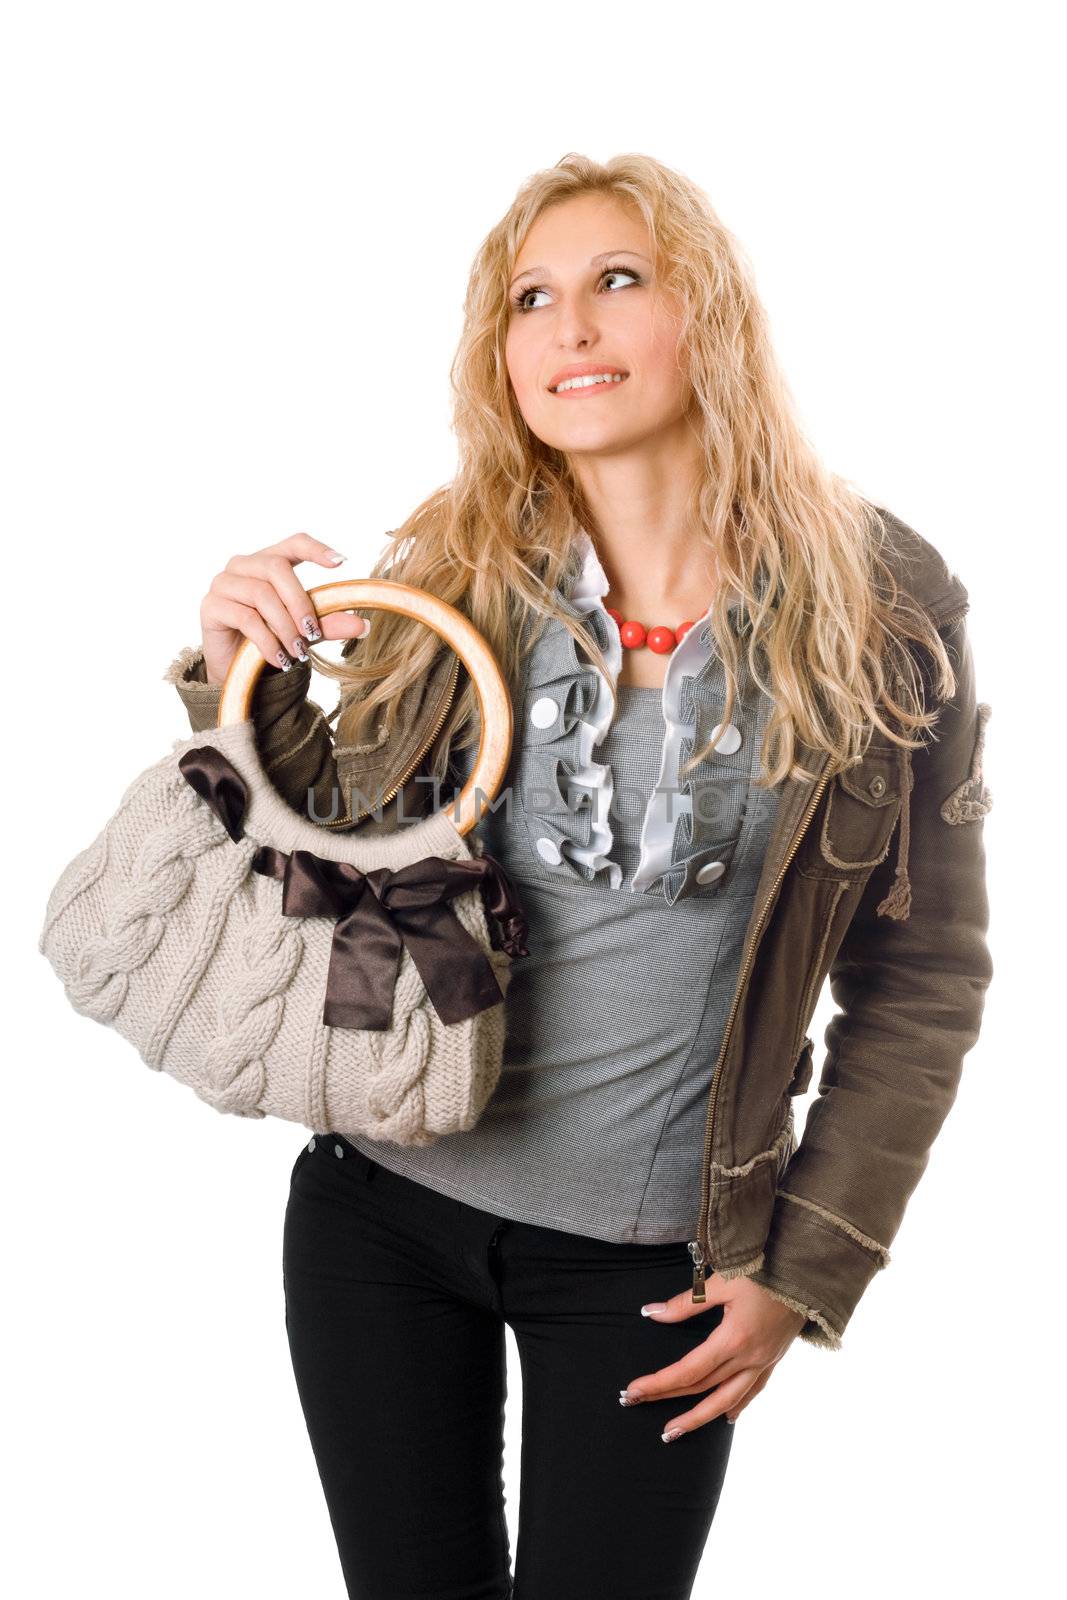 Portrait of pretty young blonde with a handbag. Isolated